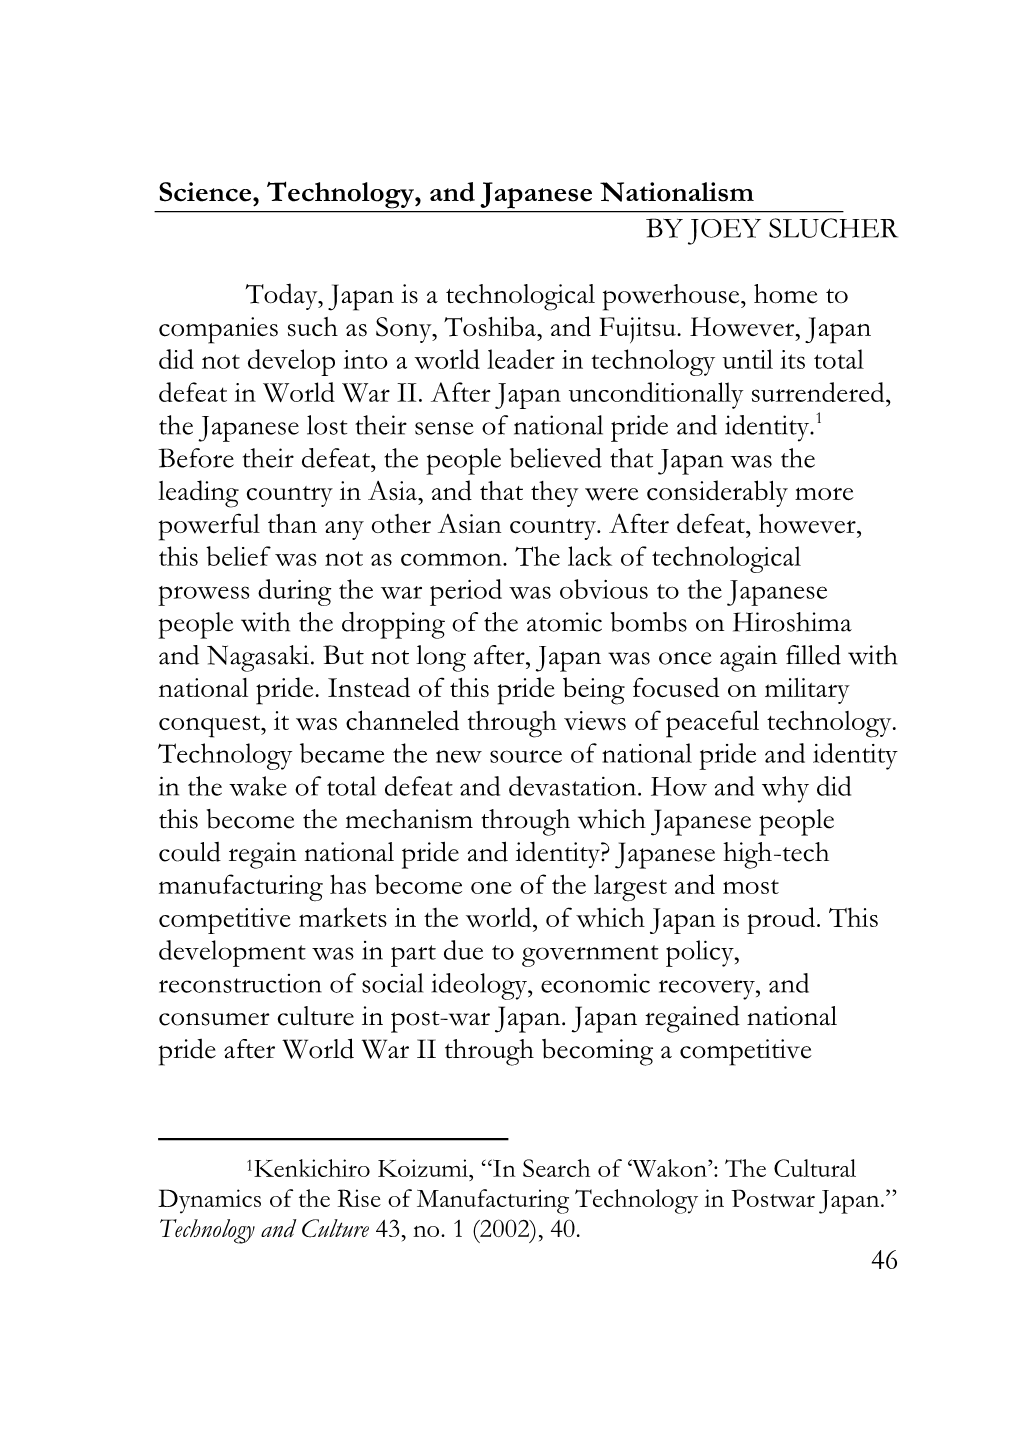 Science, Technology, and Japanese Nationalism by JOEY SLUCHER